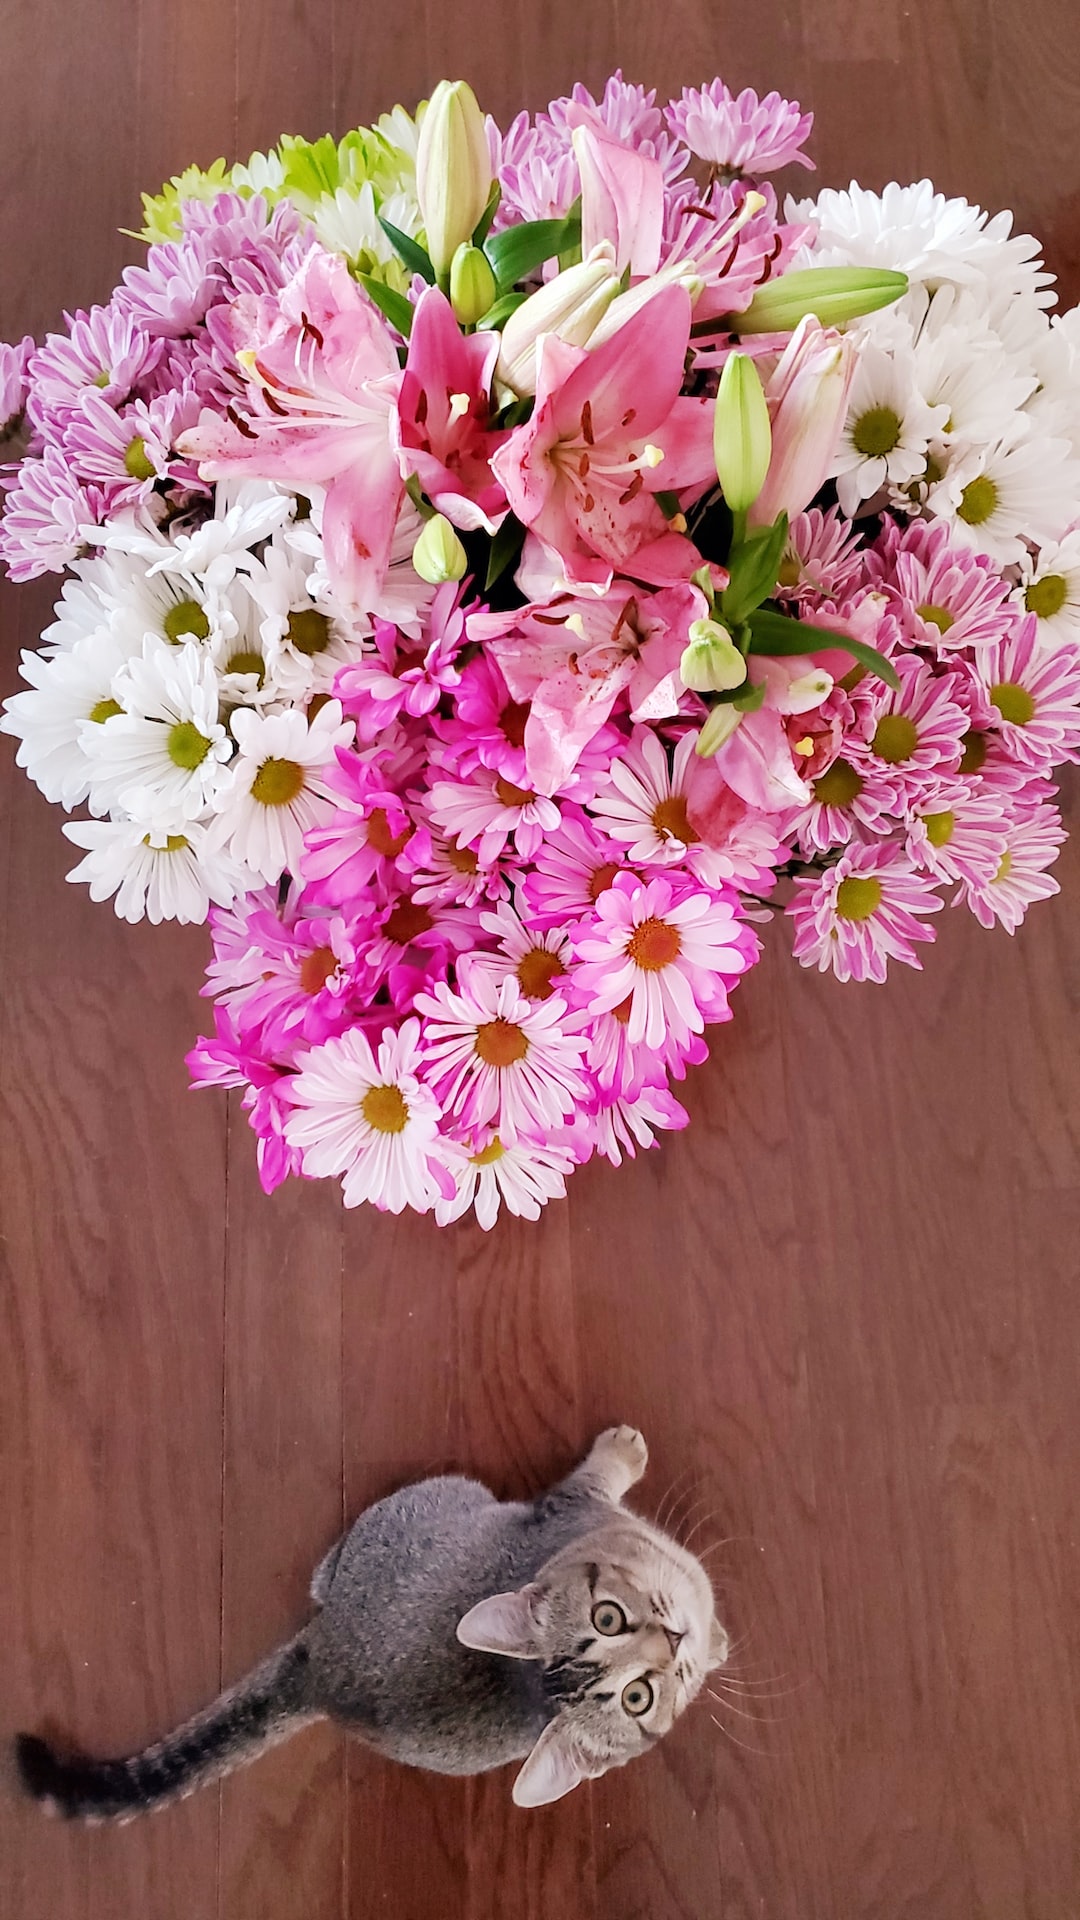 pink and white flowers on brown wooden table